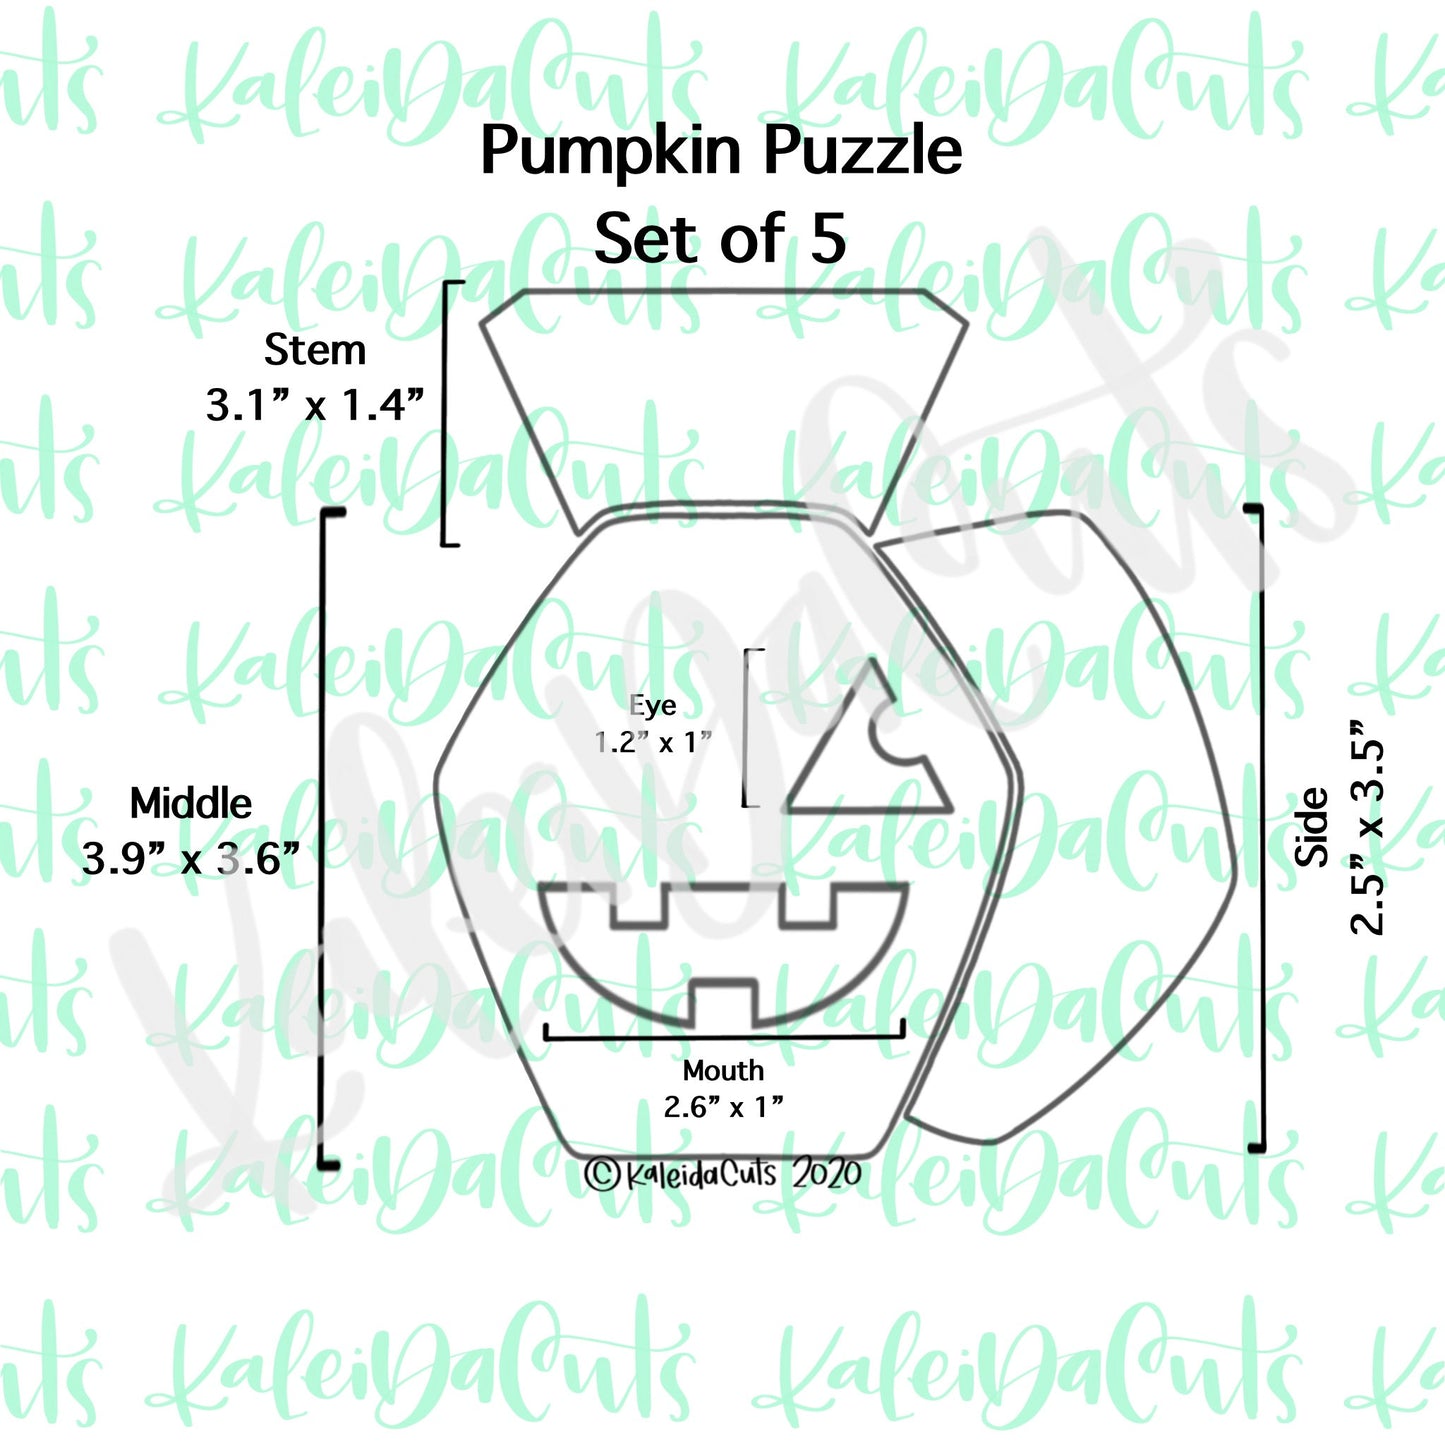 Pumpkin Puzzle Set of 5 Cookie Cutters